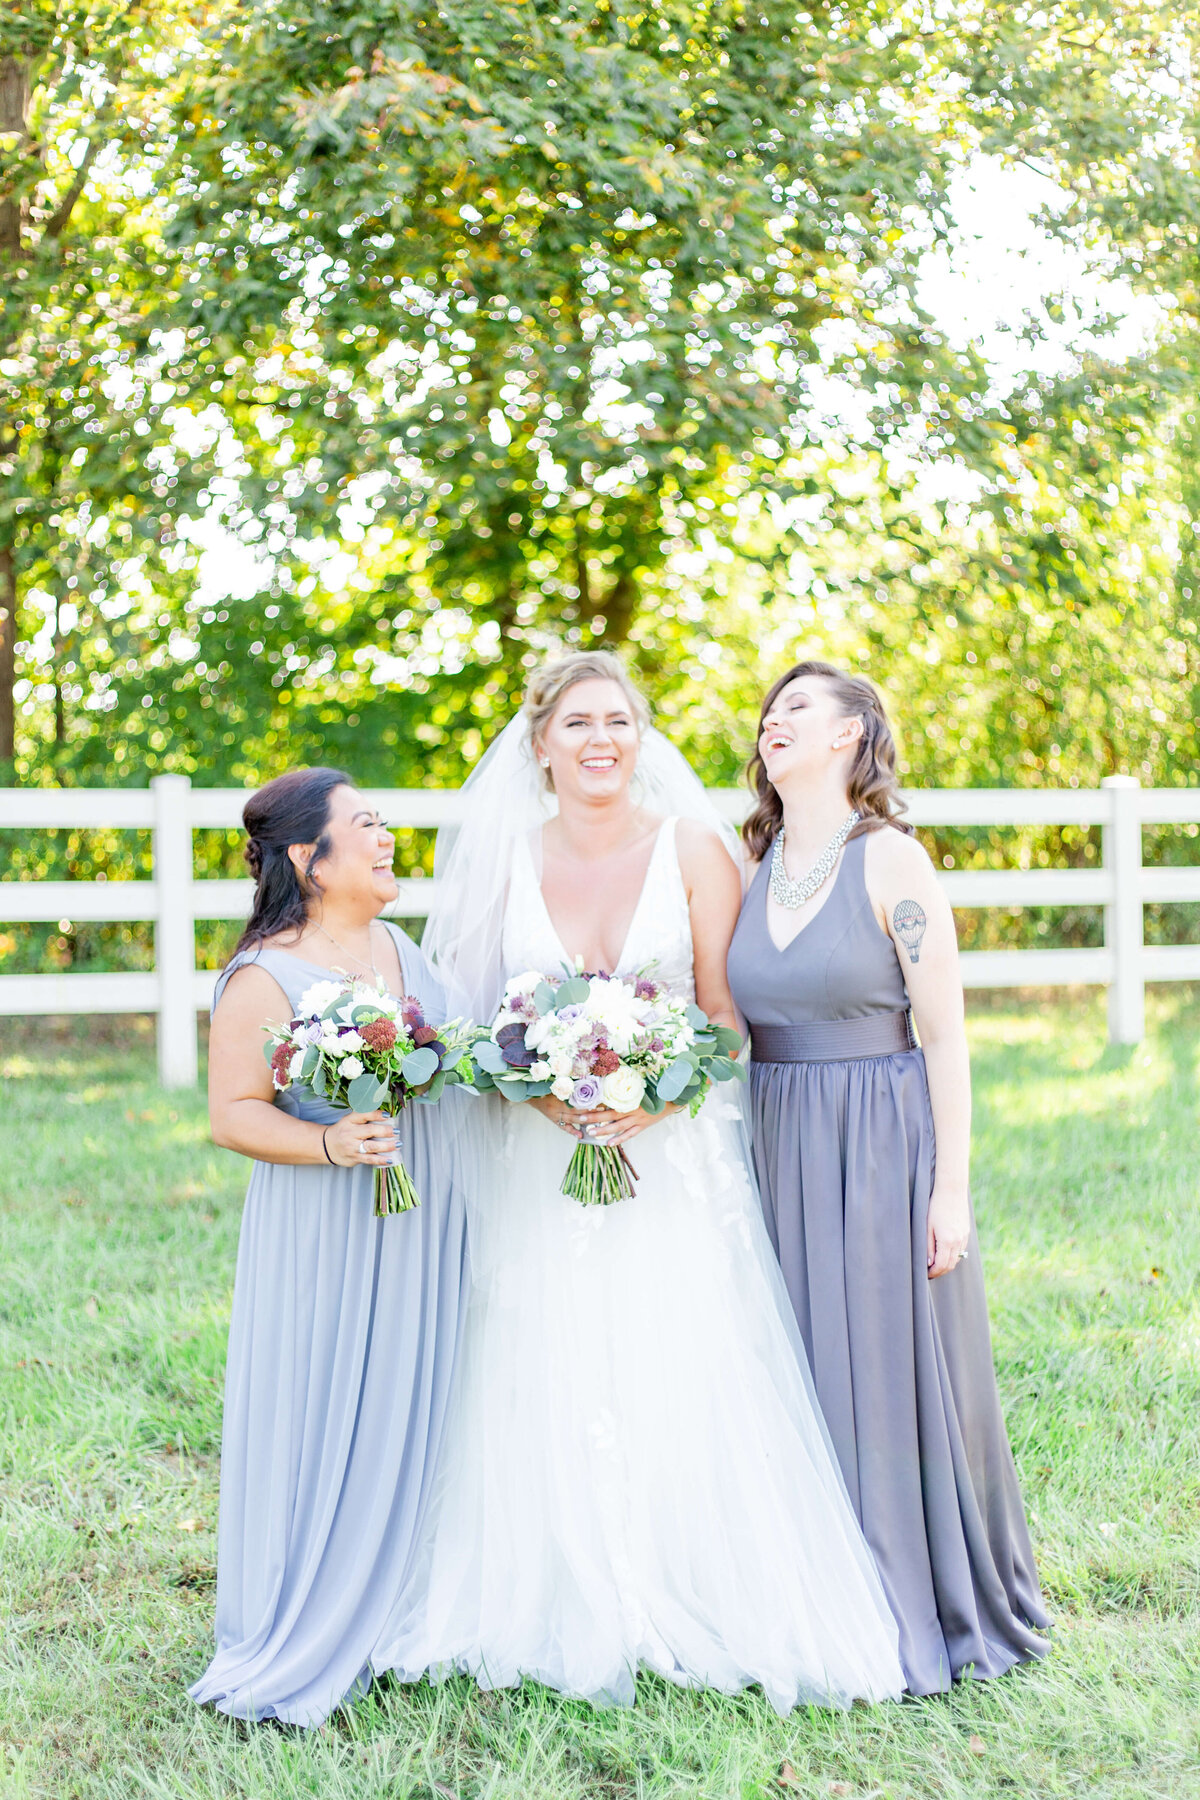 Rolling Meadows Ranch Wedding - Bethany Lane Photography-2